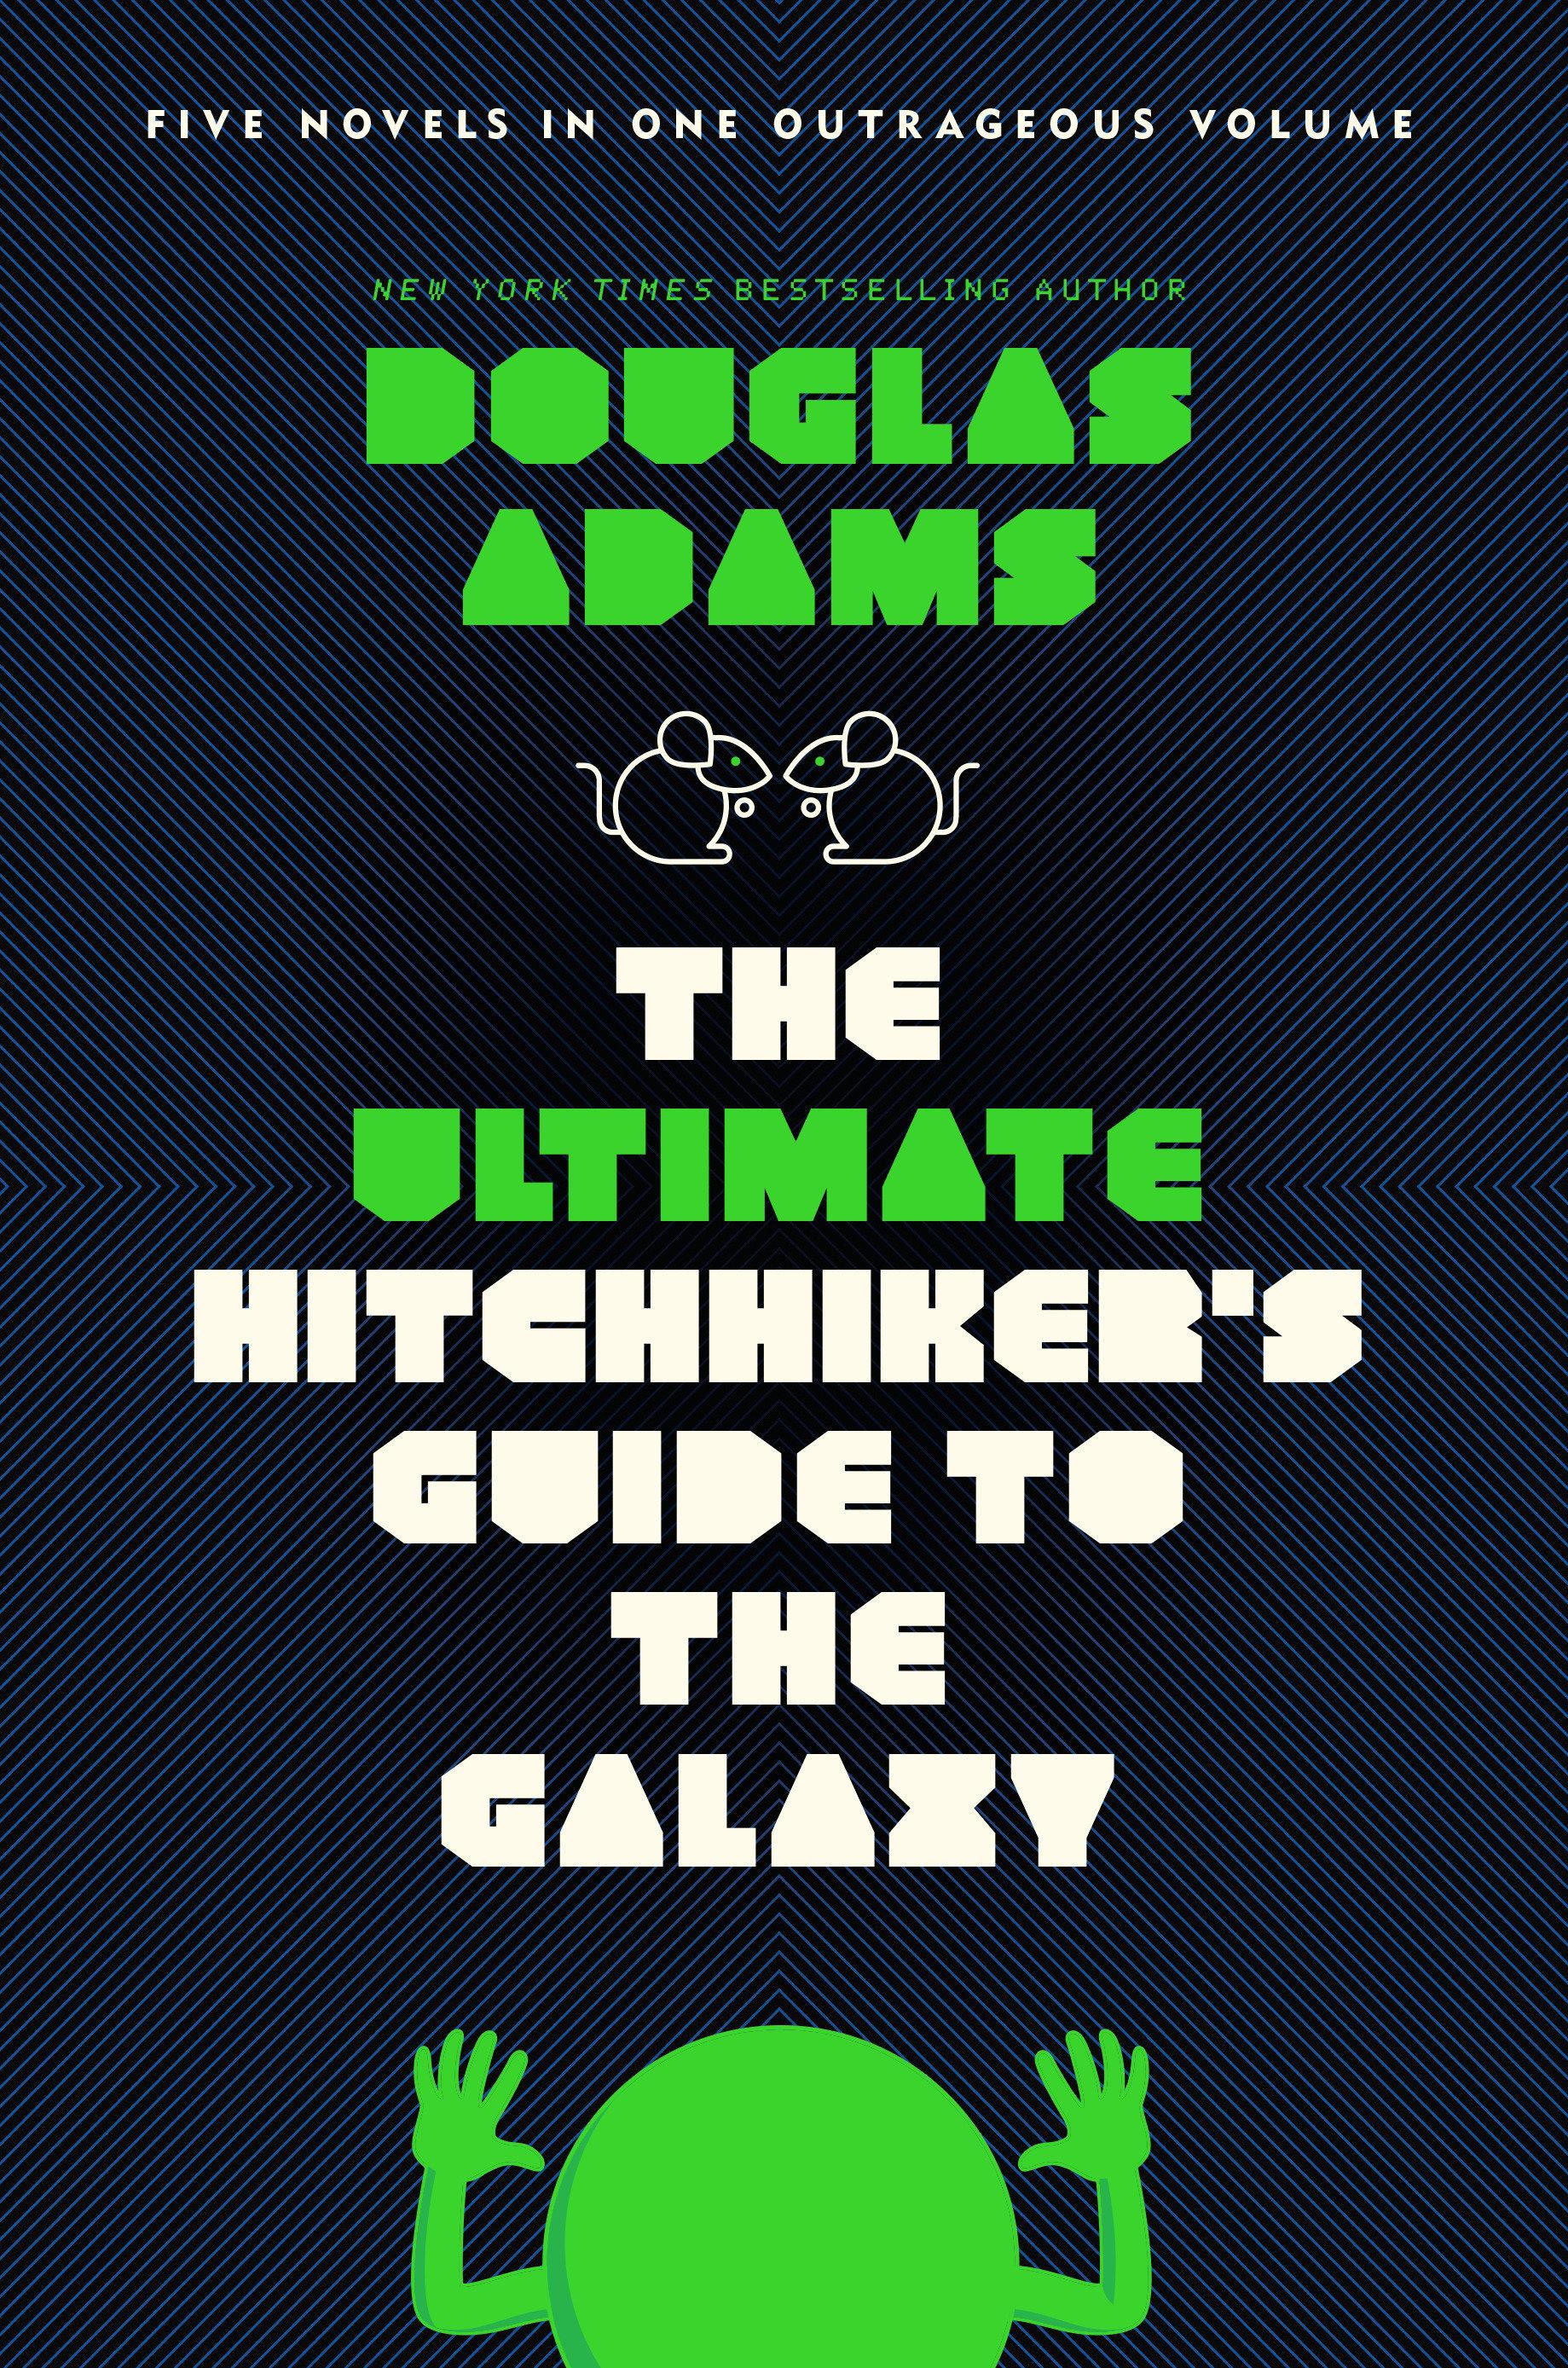 The Ultimate Hitchhiker's Guide to the Galaxy / Five Novels in One Outrageous Volume / Douglas Adams / Taschenbuch / 815 S. / Englisch / 2009 / Random House LLC US / EAN 9780345453747 - Adams, Douglas